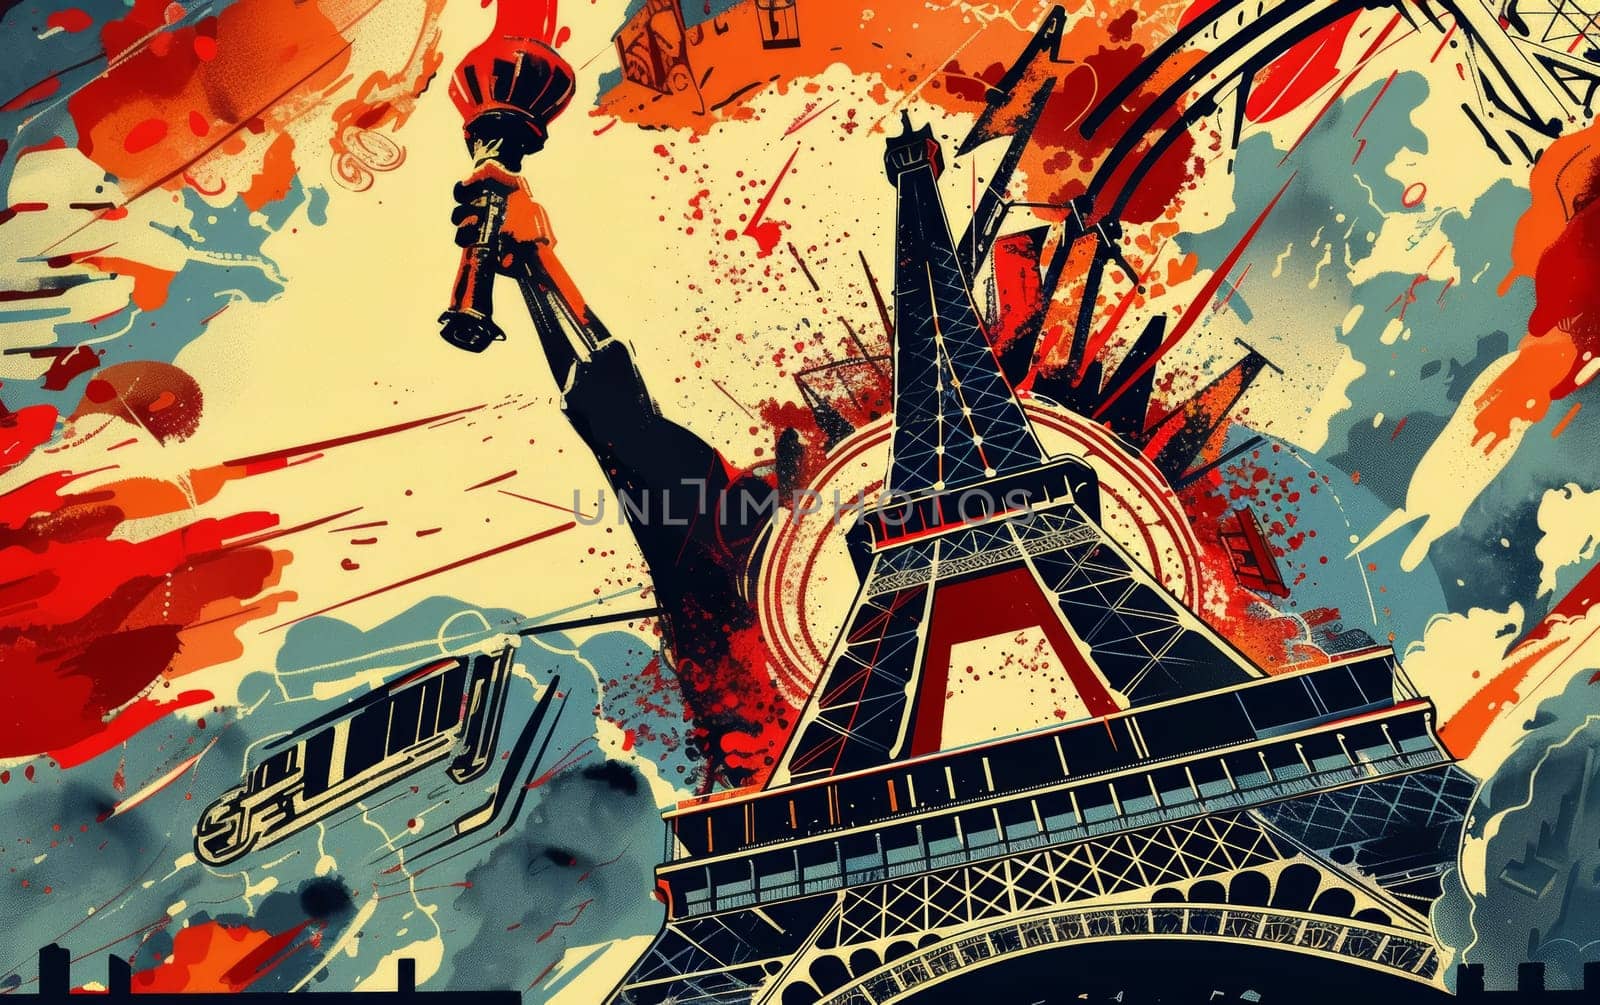 Artistic depiction of the Eiffel Tower with explosive red and blue abstract elements, giving a modern twist to the iconic structure